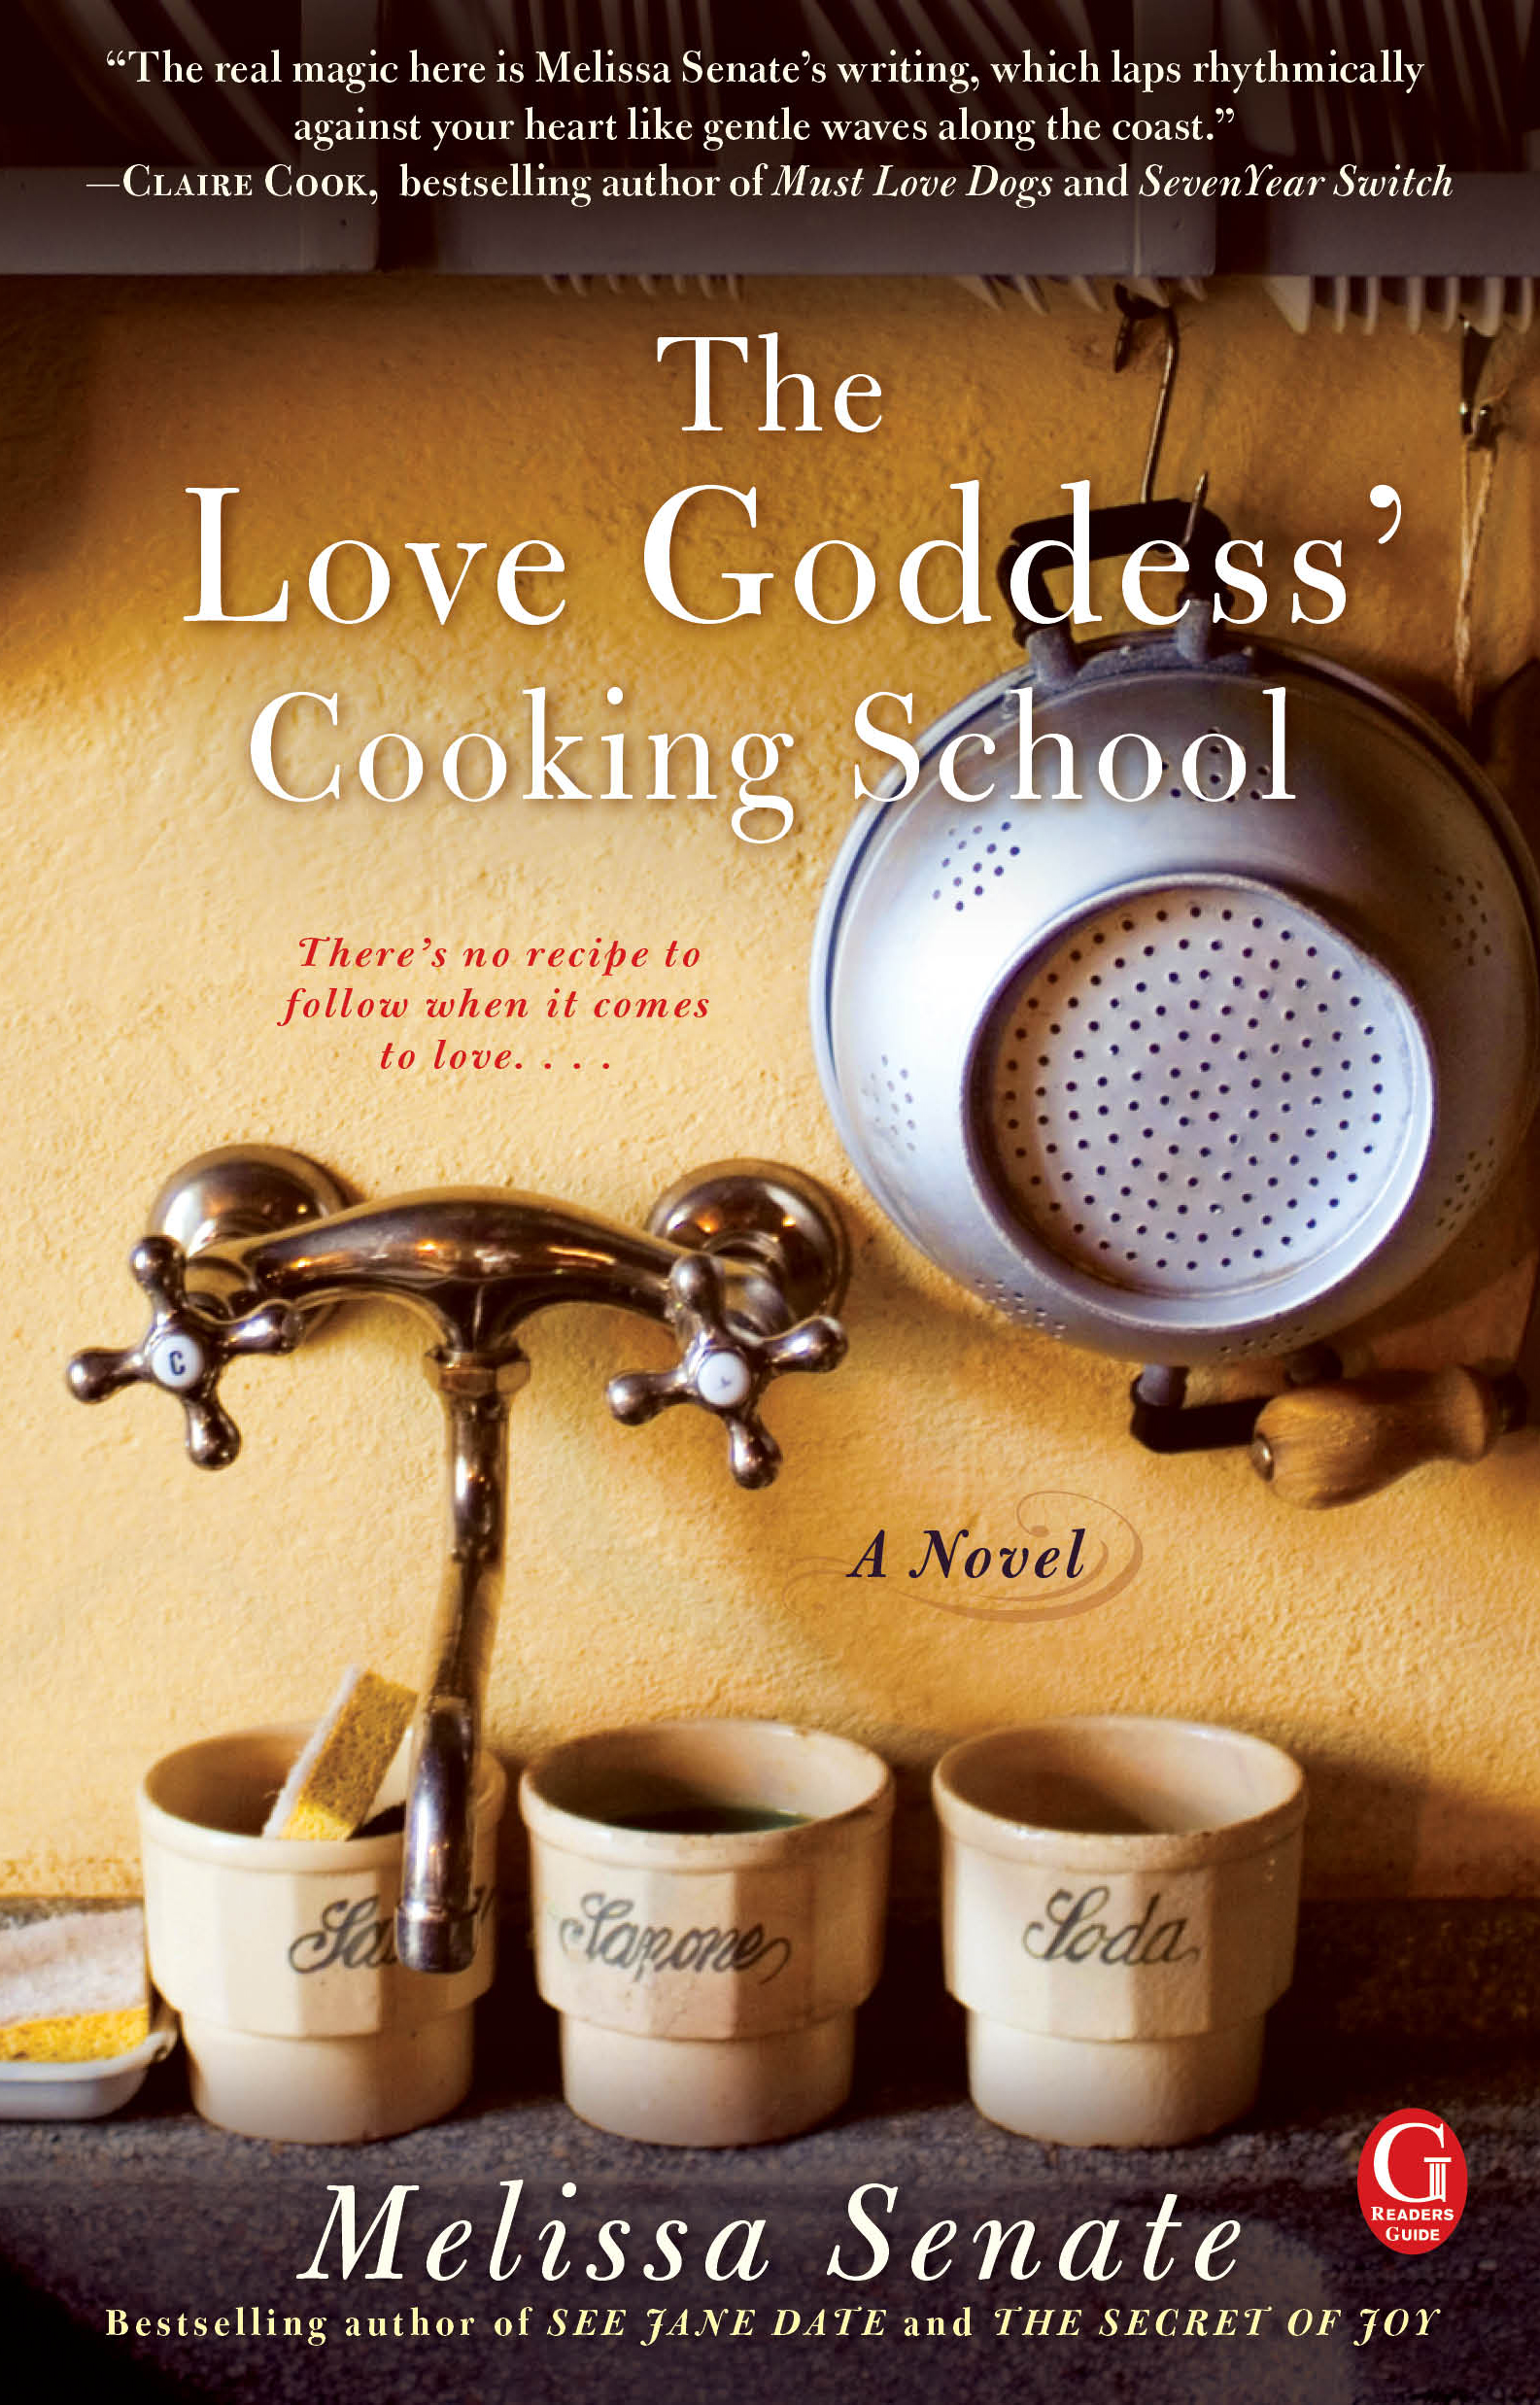 The Love Goddess' Cooking School